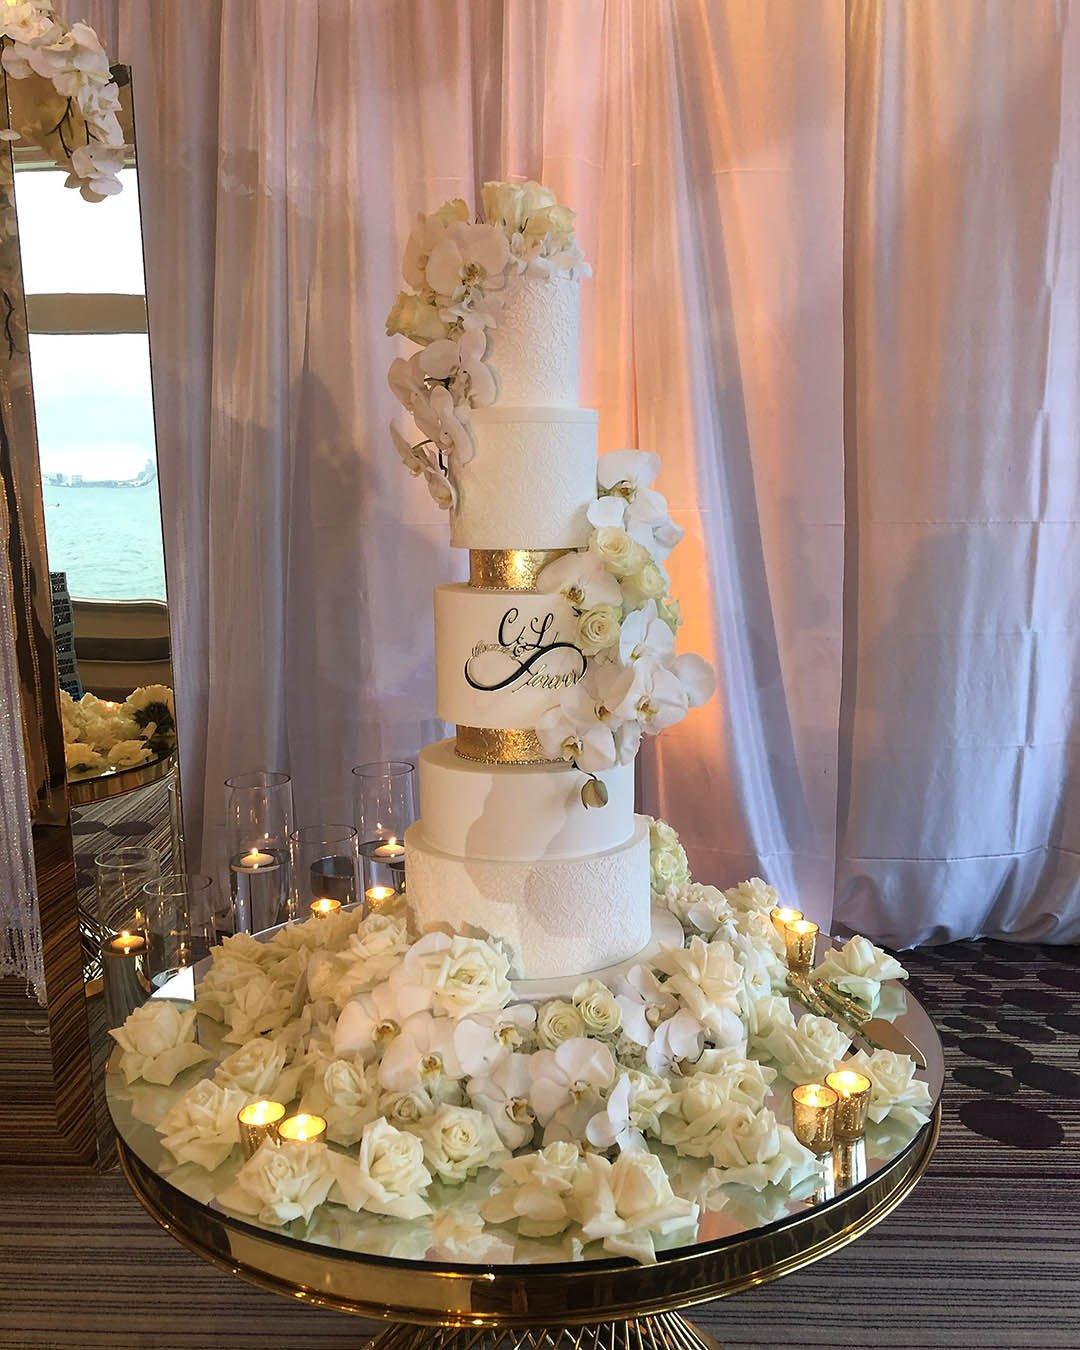 Little Muse Catering and Cakes - Wedding Cake - San Antonio, TX -  WeddingWire